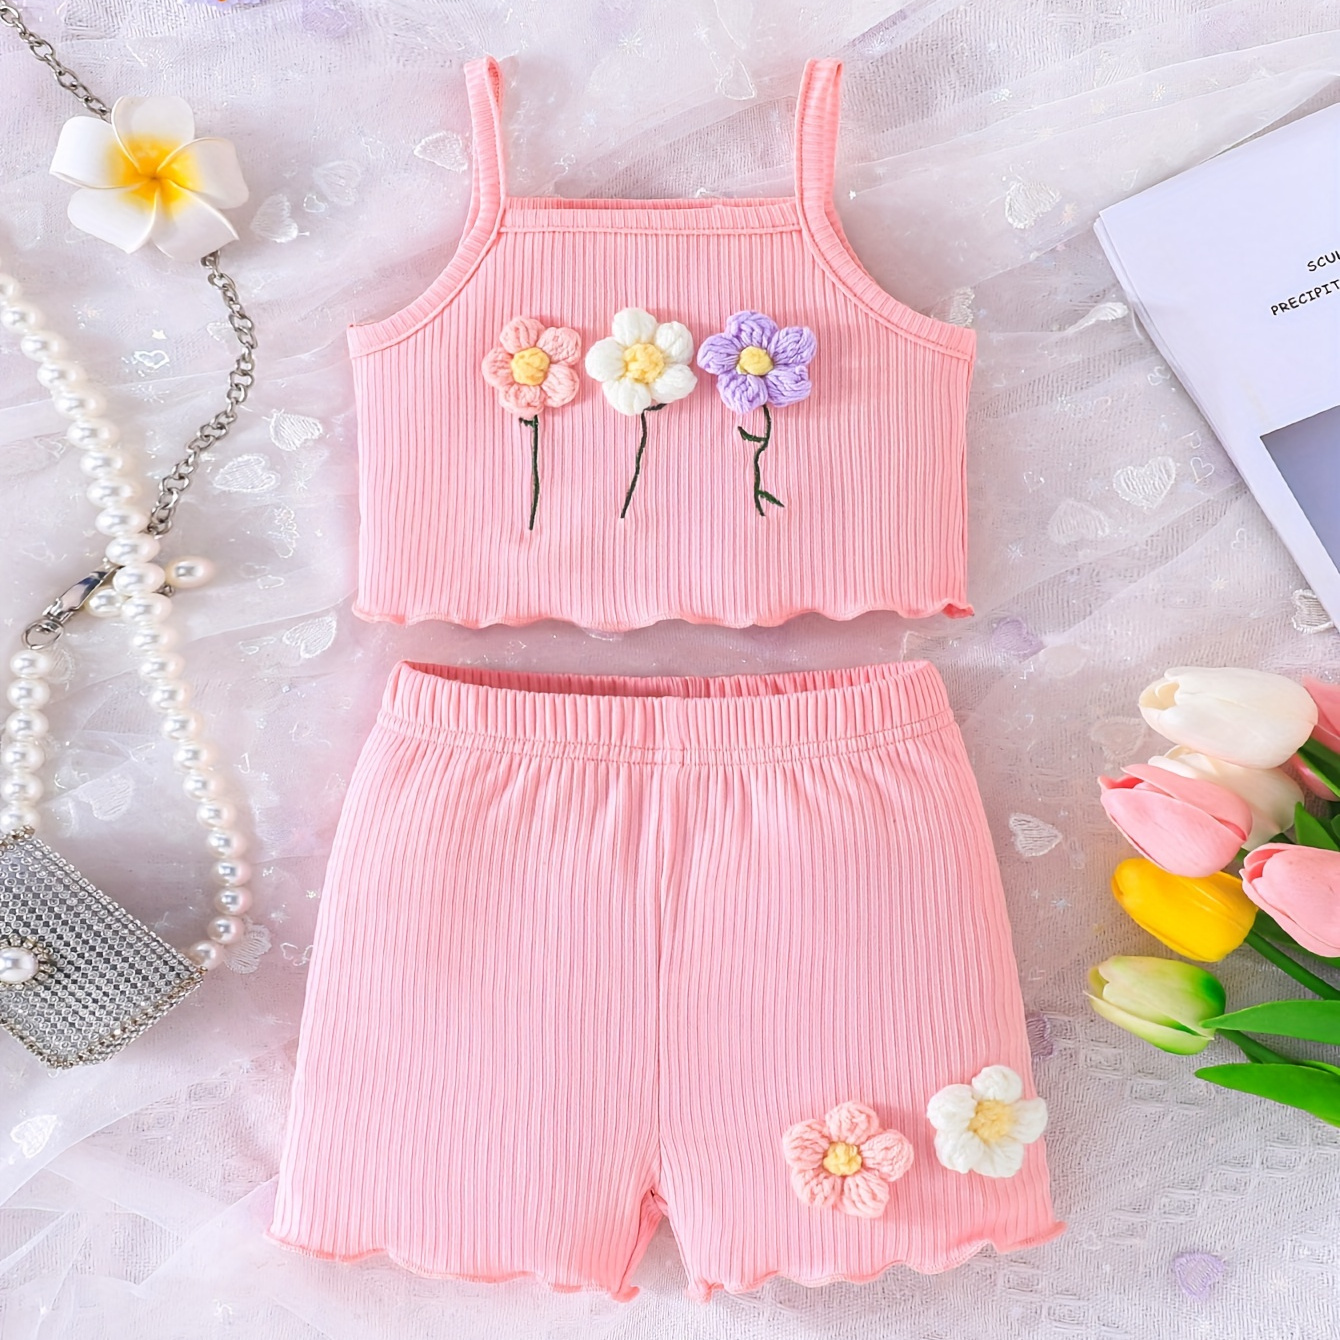 

Baby's Cute Flower Applique 2pcs Summer Casual Outfit, Ribbed Cami Top & Shorts Set, Toddler & Infant Girl's Clothes For Daily/holiday, As Gift